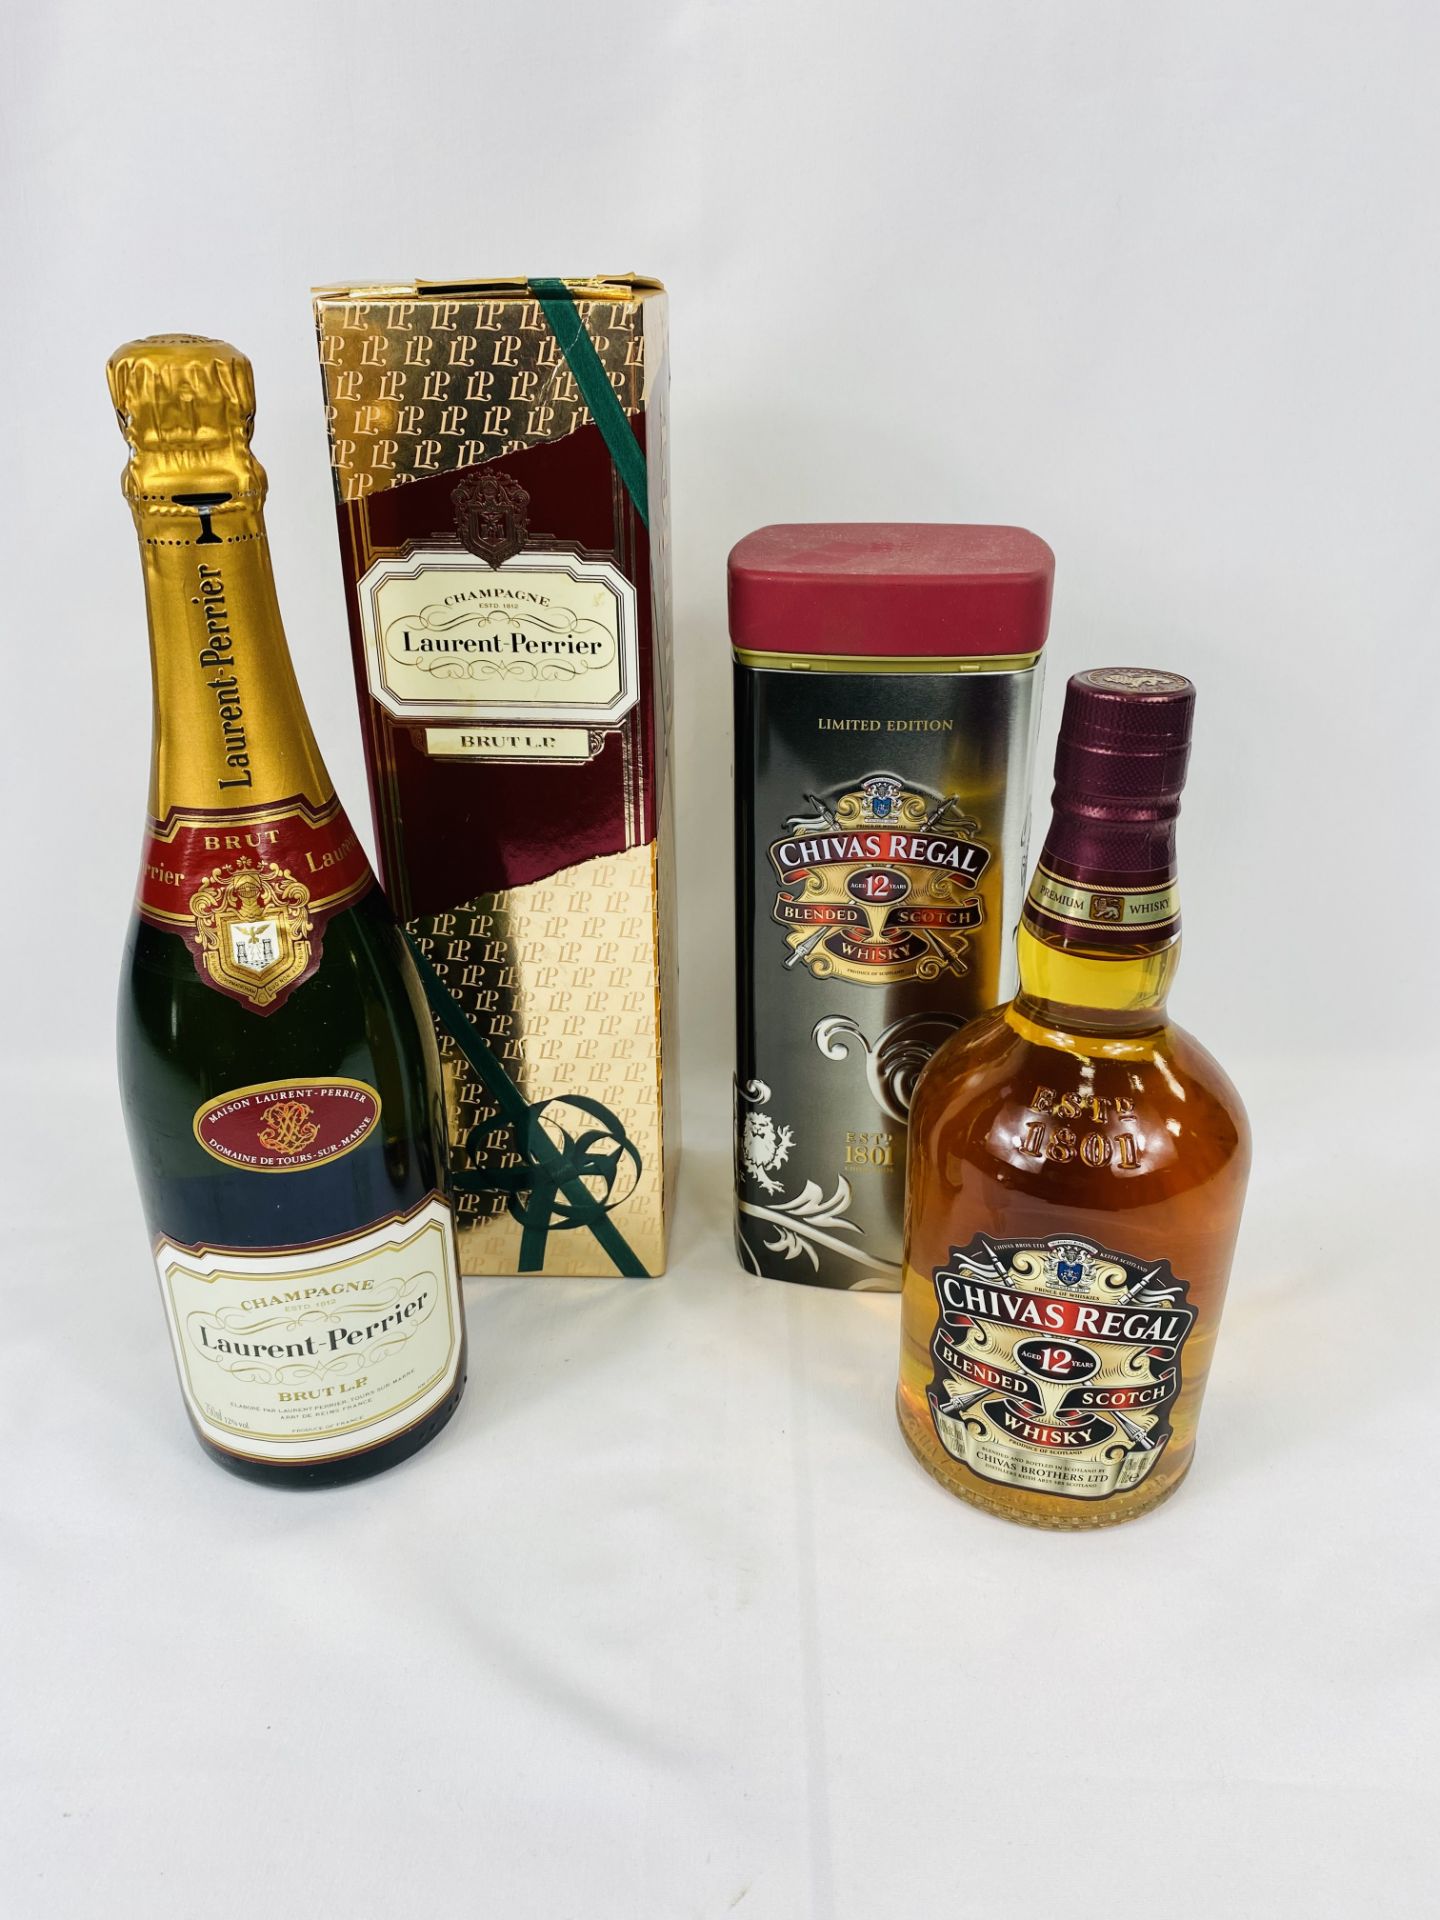 75cl bottle of Laurent Perrier champagne and a bottle of whisky - Image 4 of 4